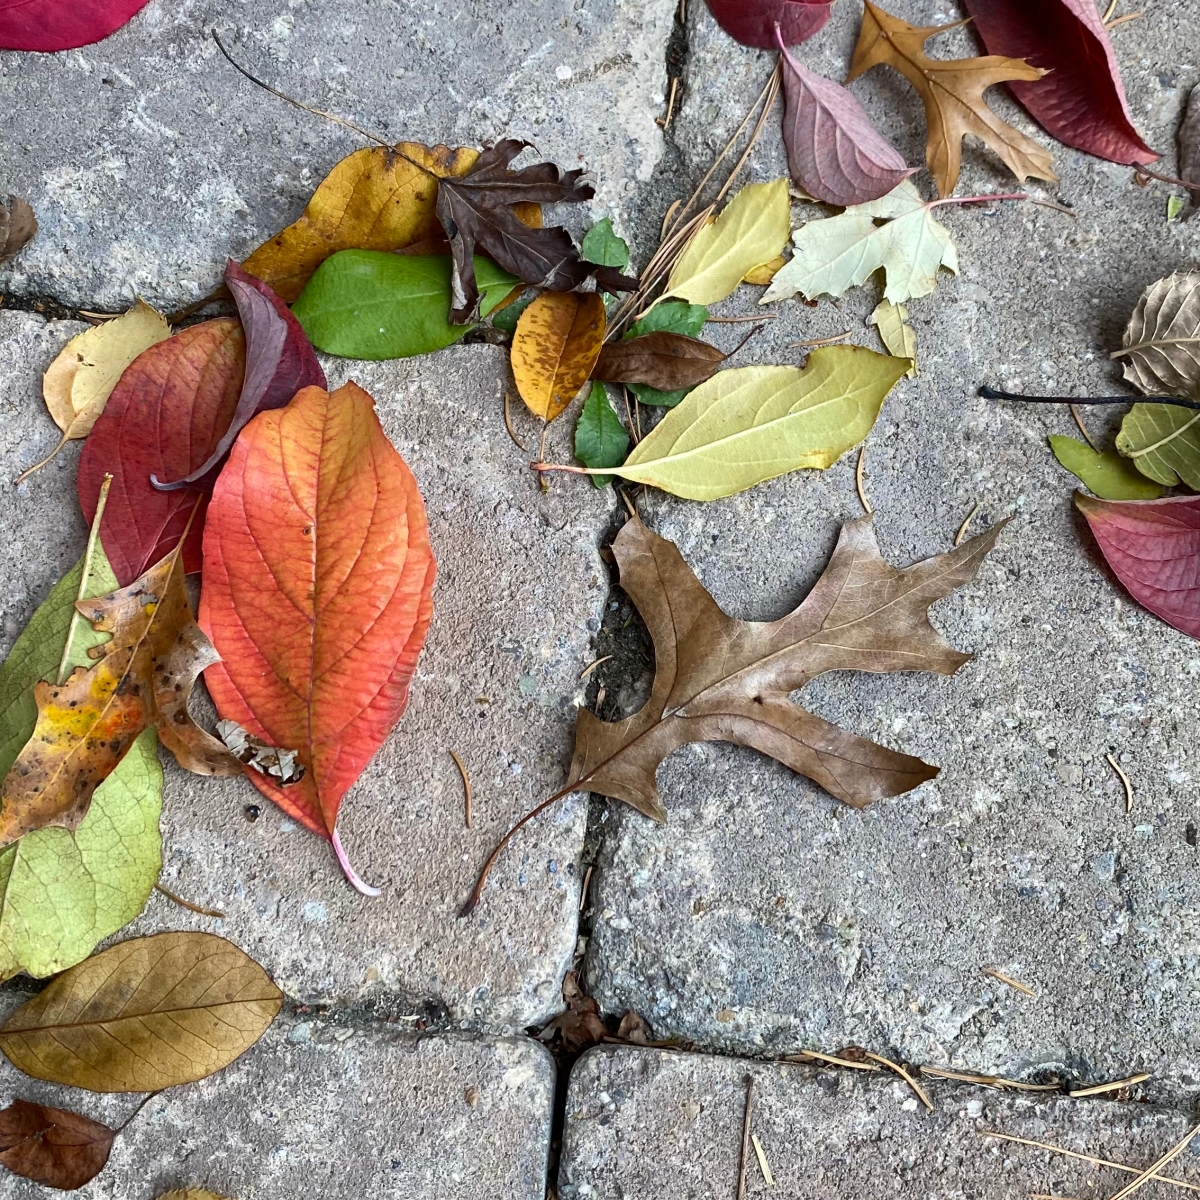 Photo of a few scattered fall leaves in orange, red, brown, and yellow on brick sidewalk